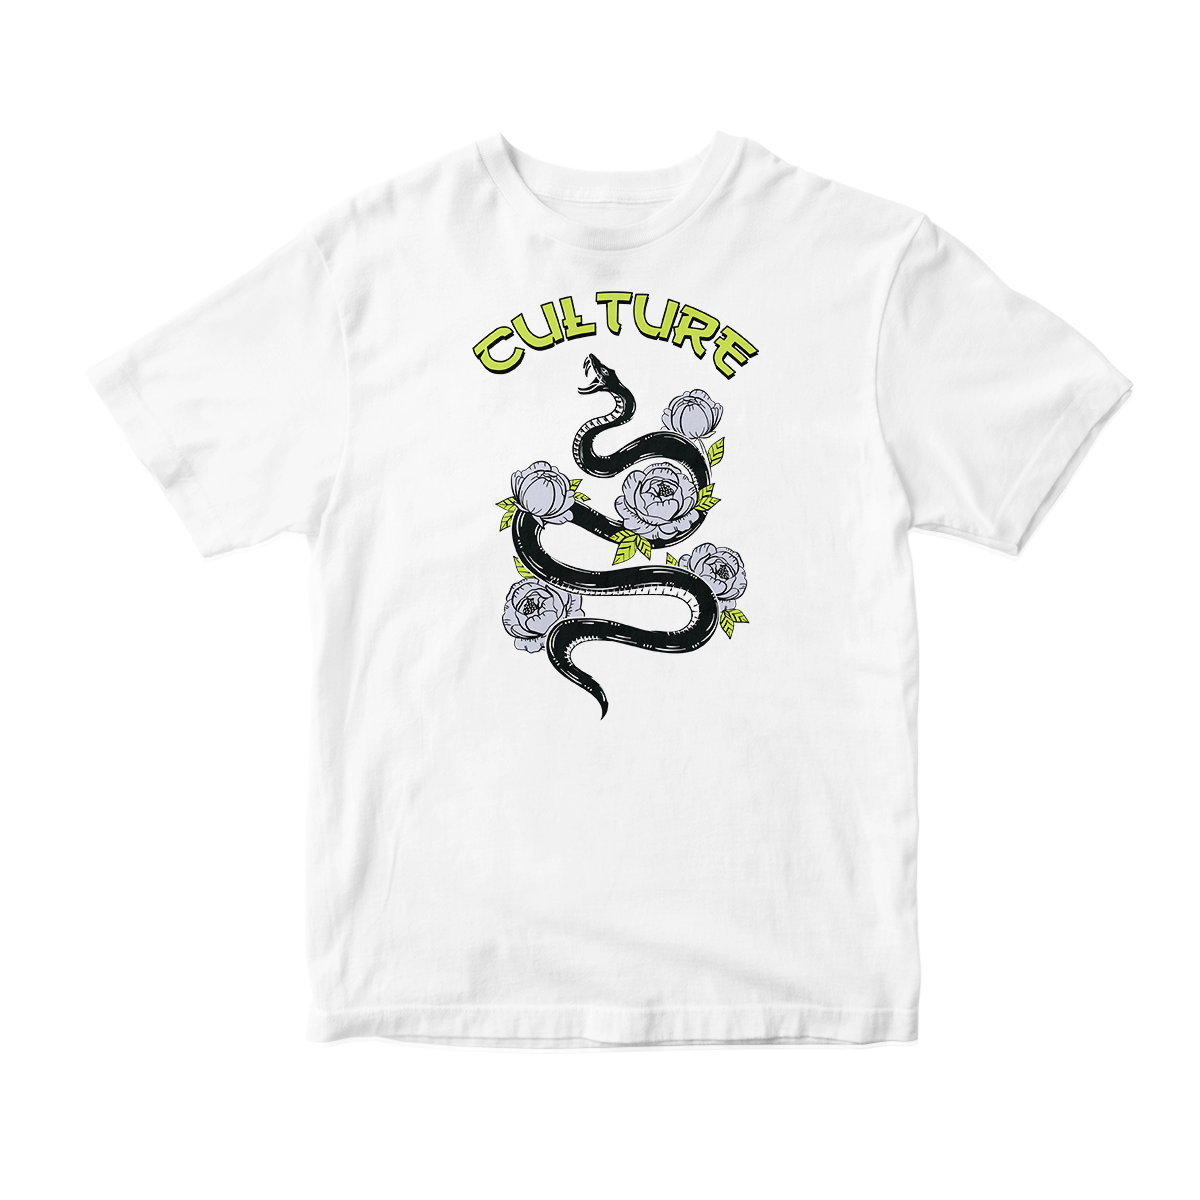 'Culture Snake' in Neon 4 CW Short Sleeve Tee